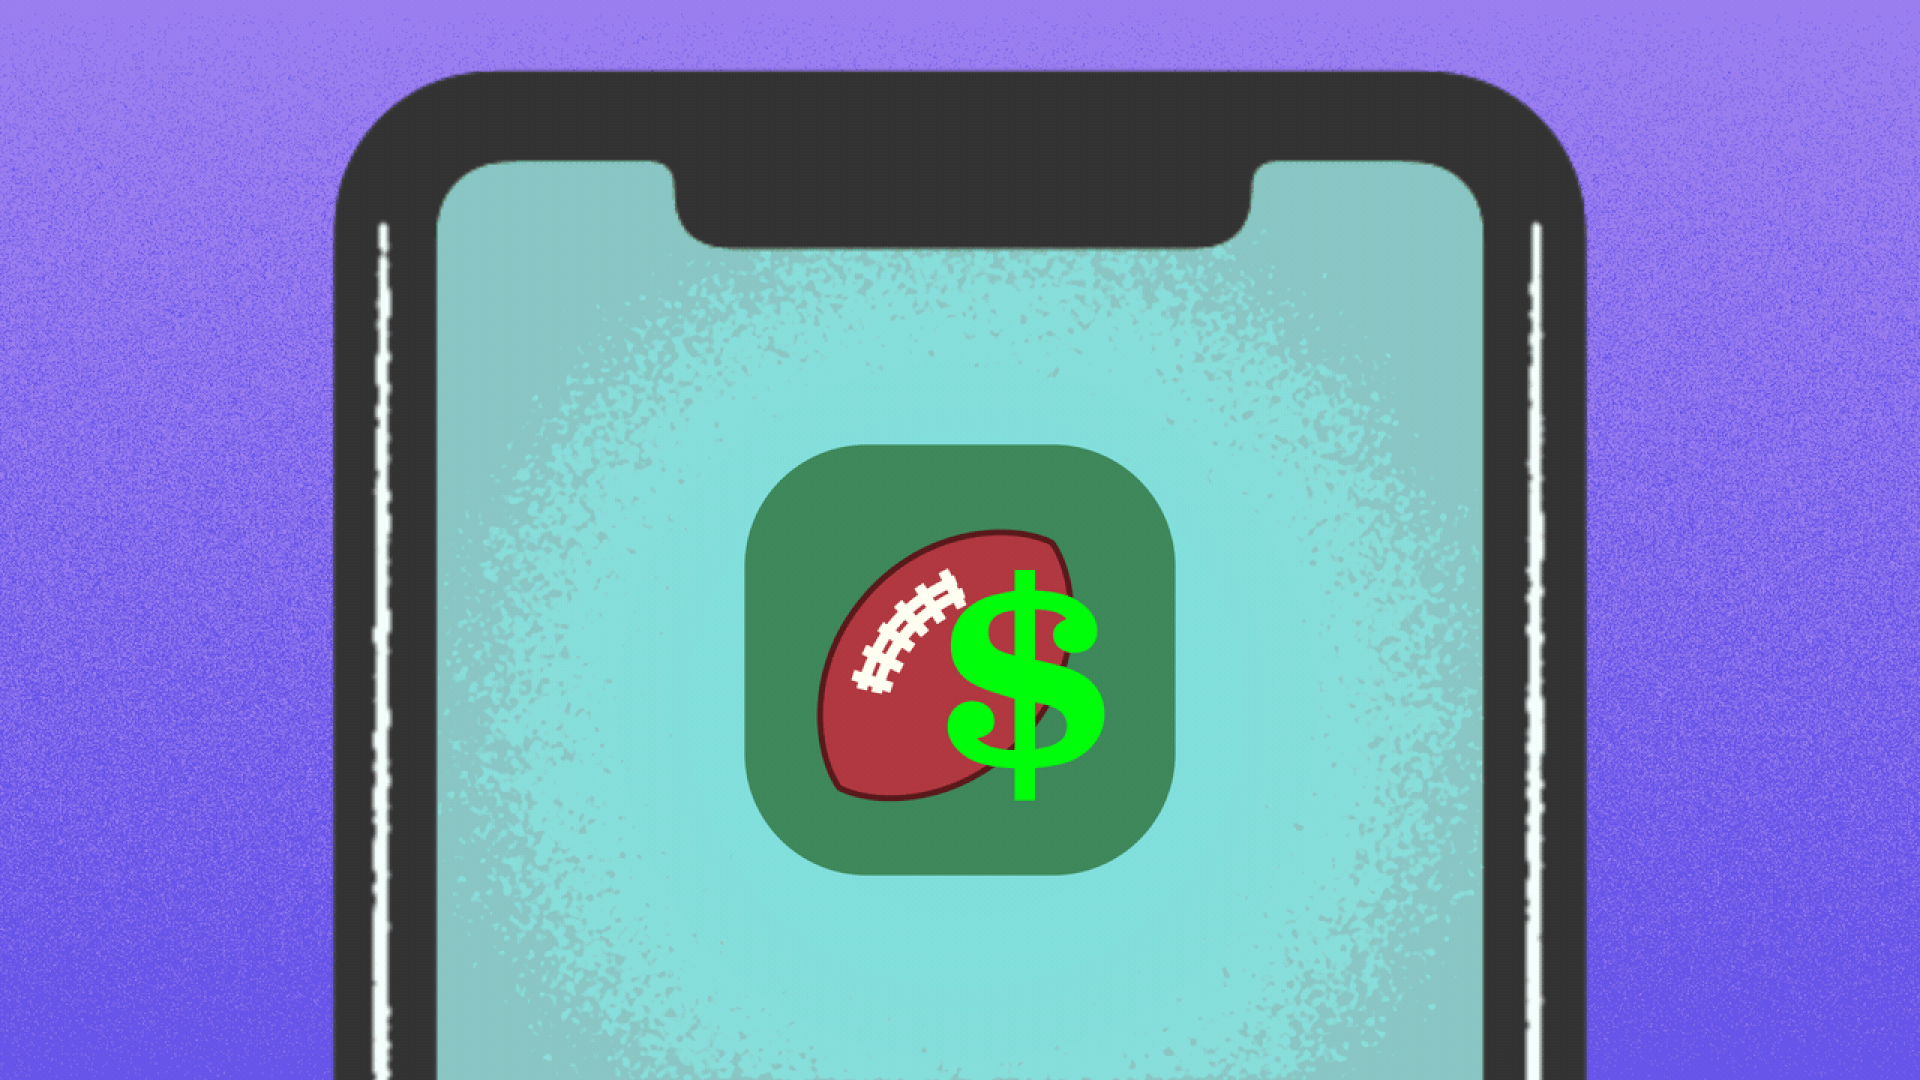 Animated illustration of a sports betting app on a phone starting to shake, and a delete button popping up in the top right corner.